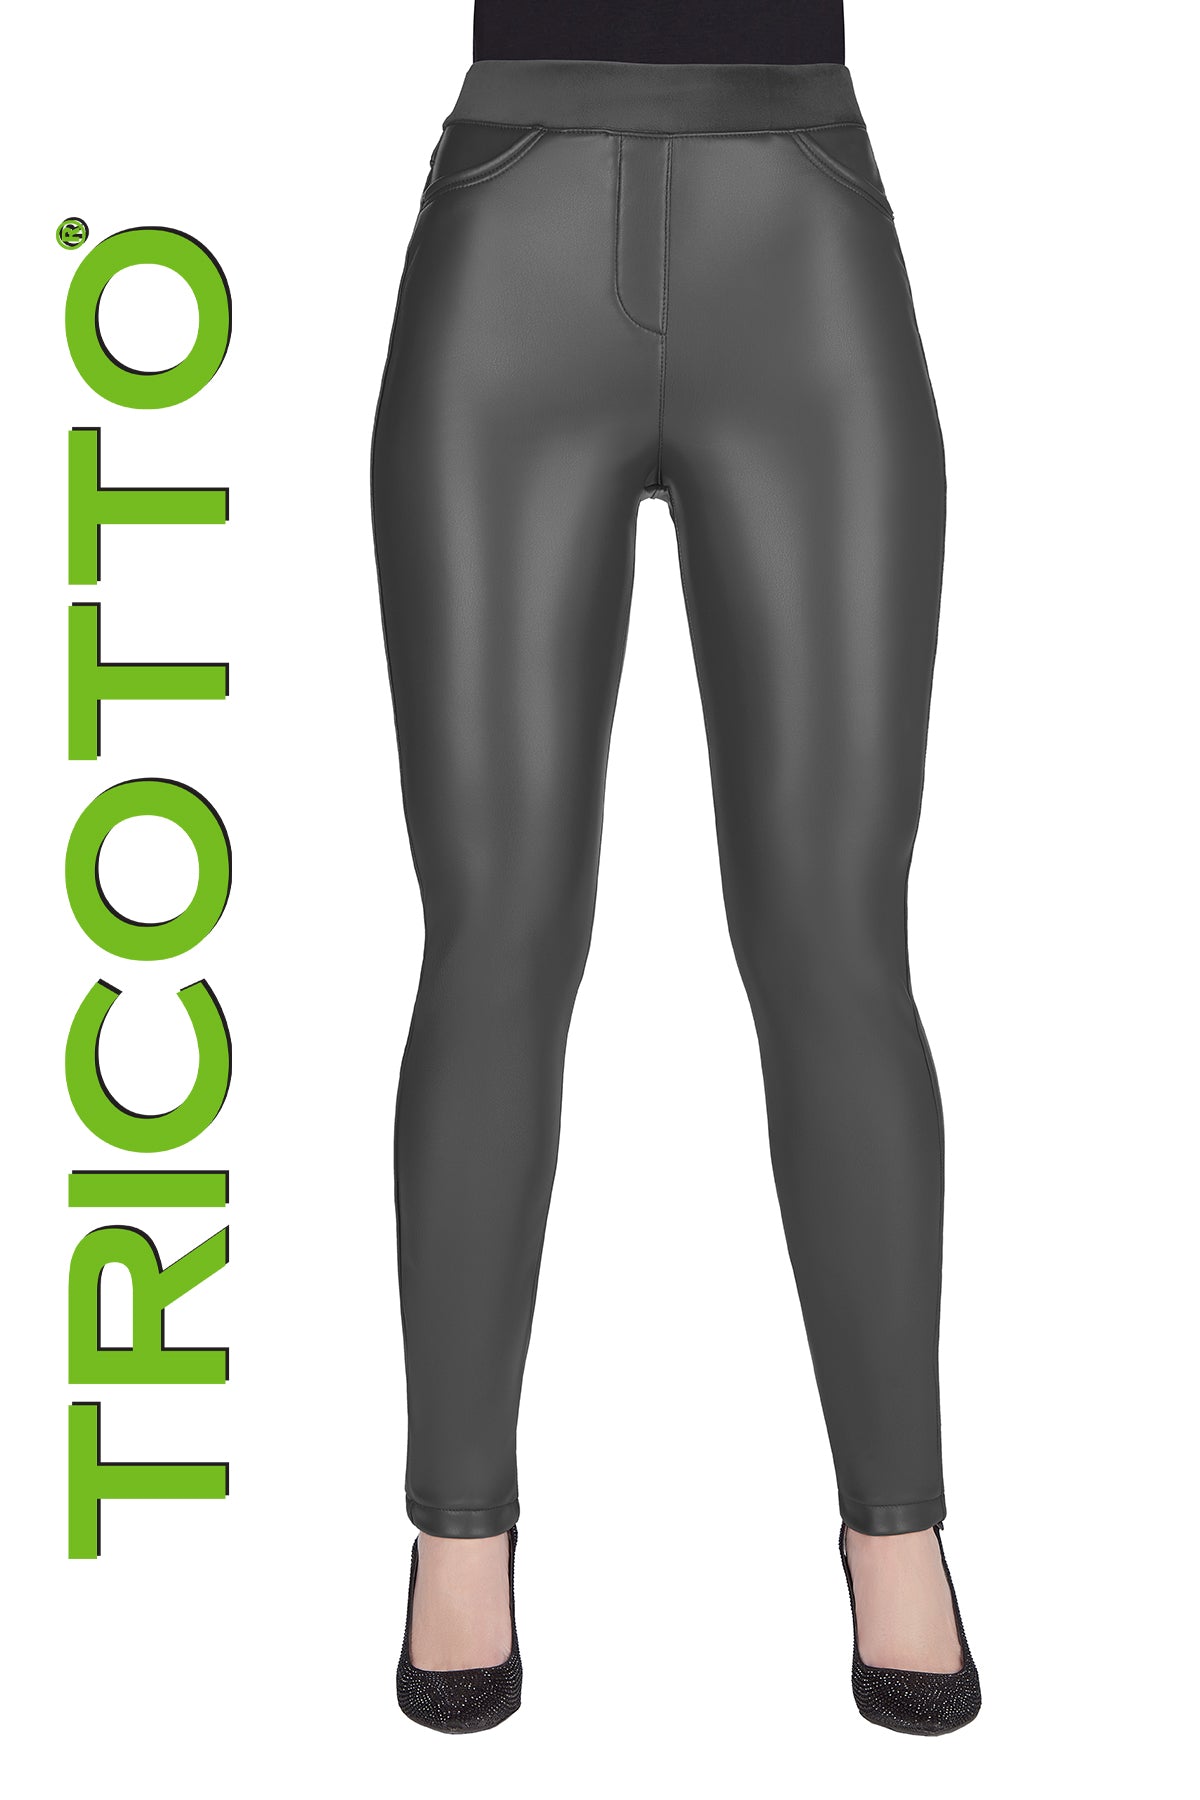 Grey Pants-Tricotto Pants-Buy Tricotto Clothing Online-Tricotto Online Shop-Tricotto Fall 2022 Collection